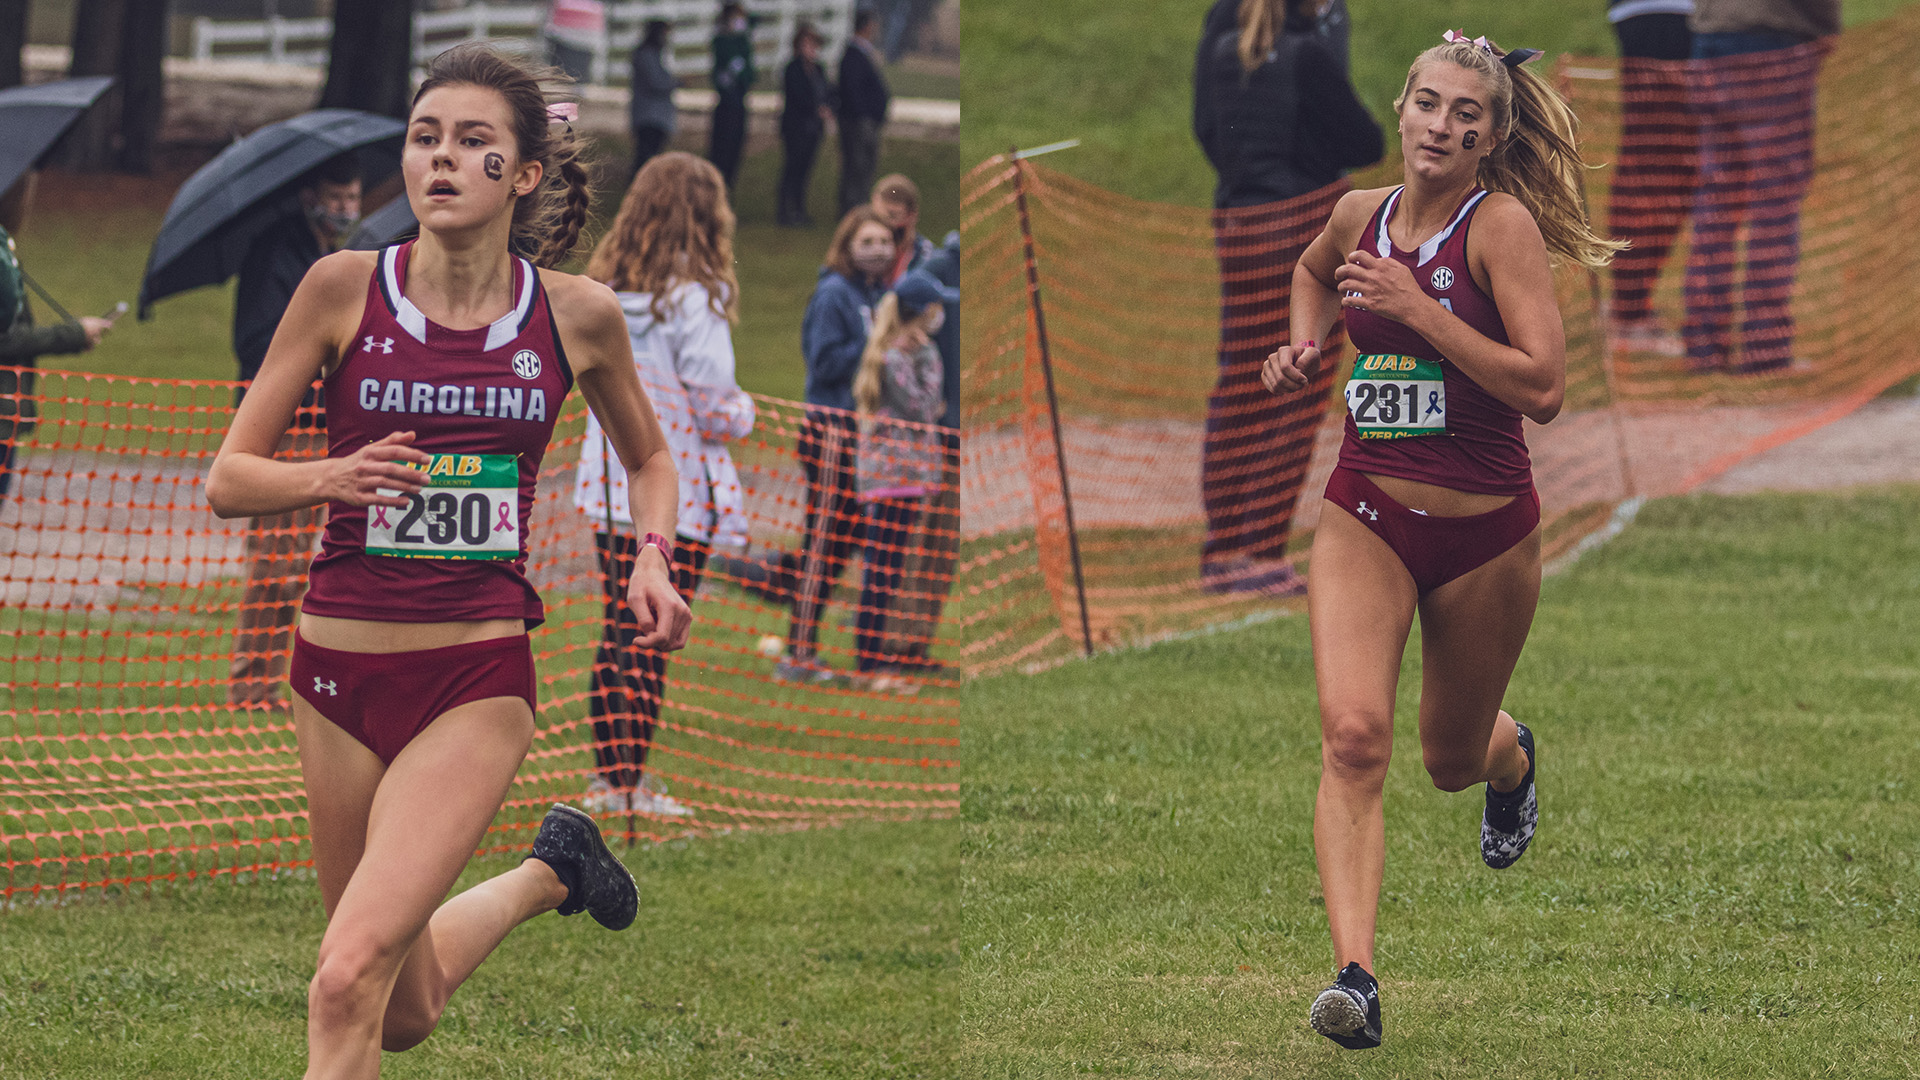 Dominique and Hendrix Named 2022 Cross Country Captains